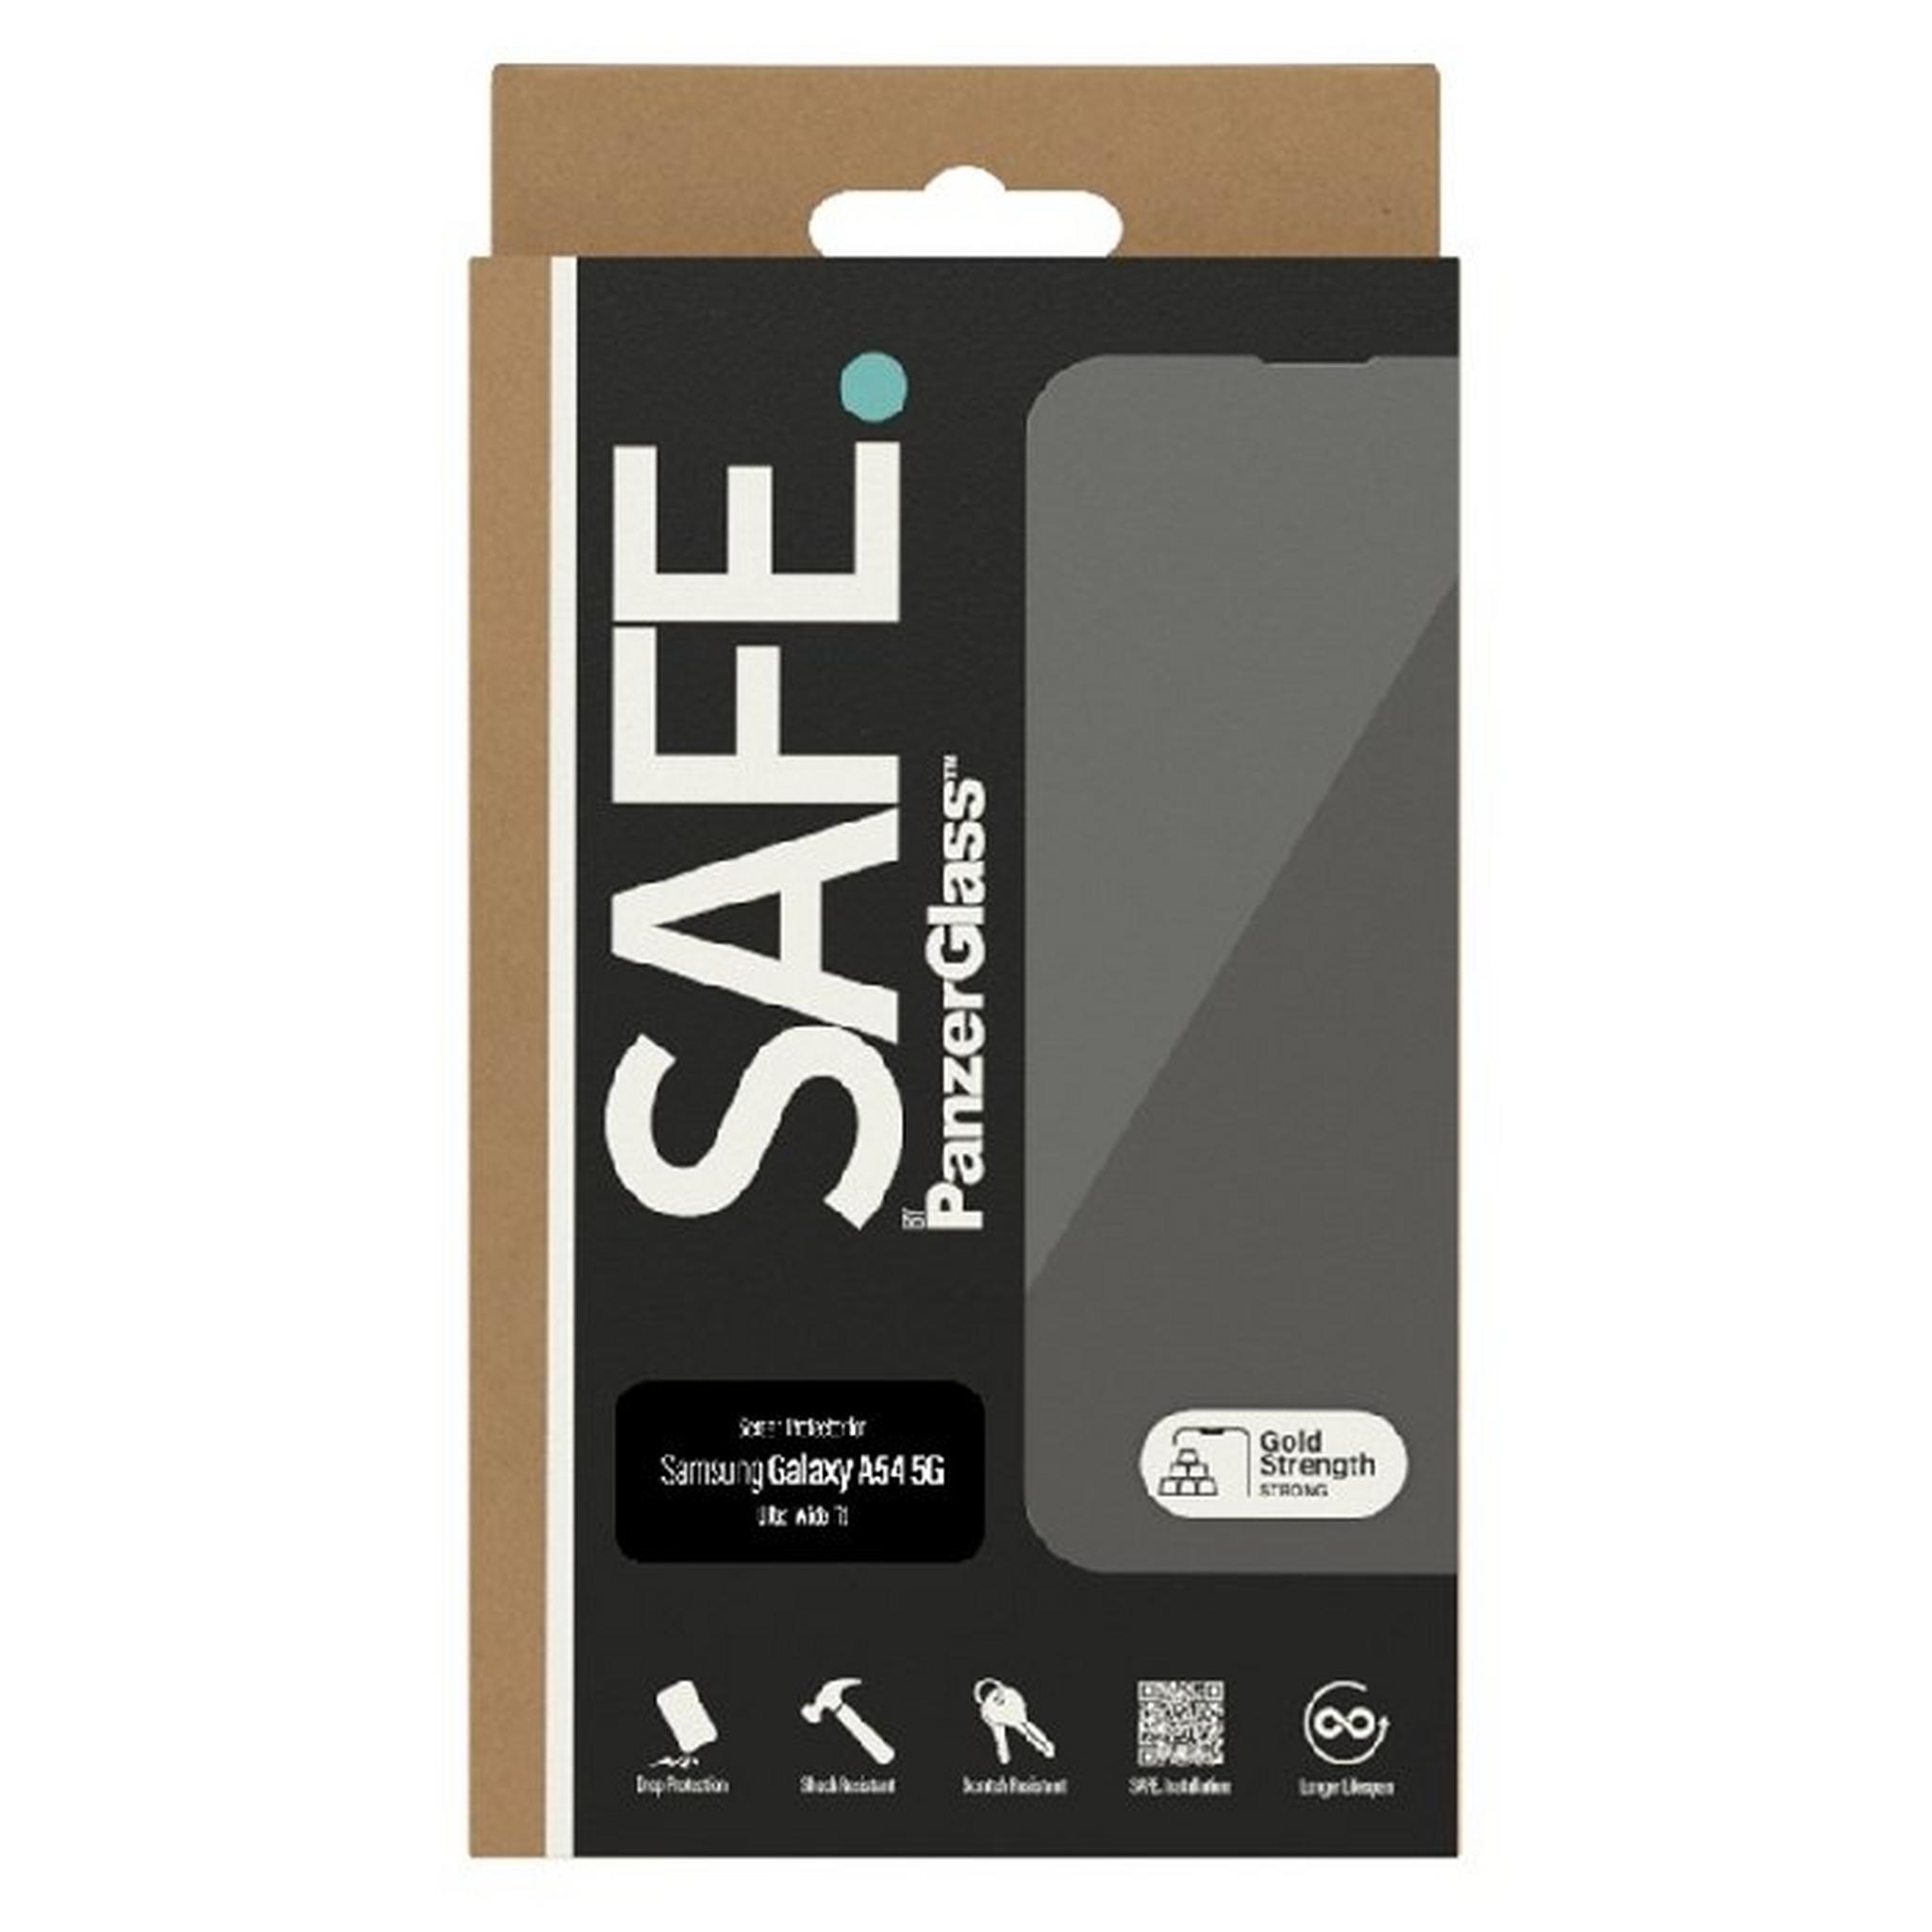 PanzerGlass Safe Screen Protector for Galaxy A54 5G, SAFE95332 - Clear